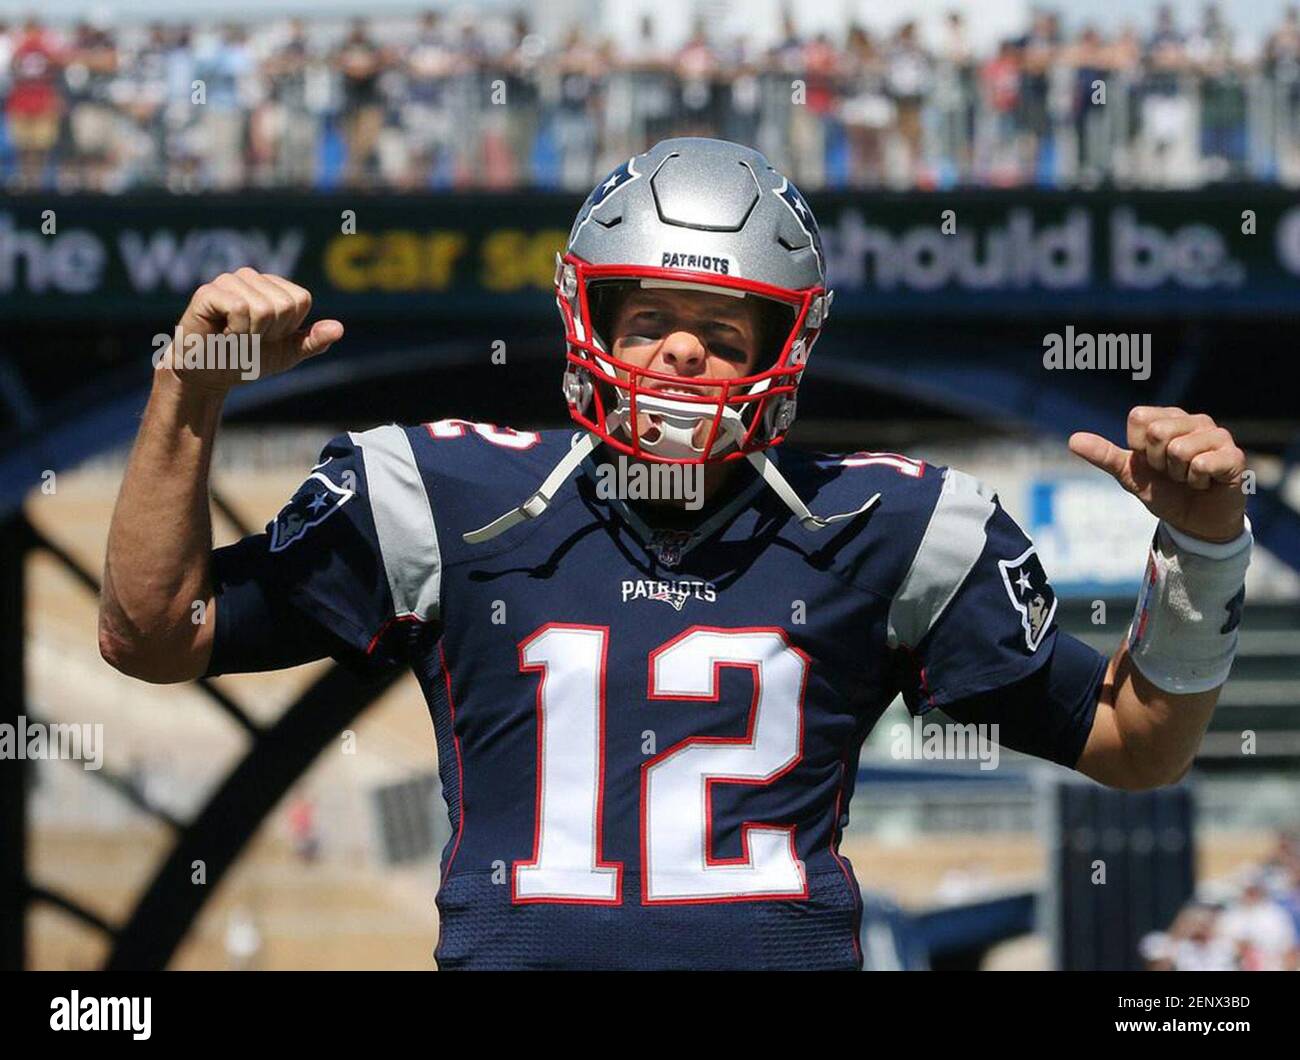 https://c8.alamy.com/comp/2ENX3BD/patriots-quarterback-tom-brady-pumps-up-the-crowd-about-an-hour-before-a-game-as-he-starts-his-warmups-photo-by-providence-journaltnssipa-usa-2ENX3BD.jpg